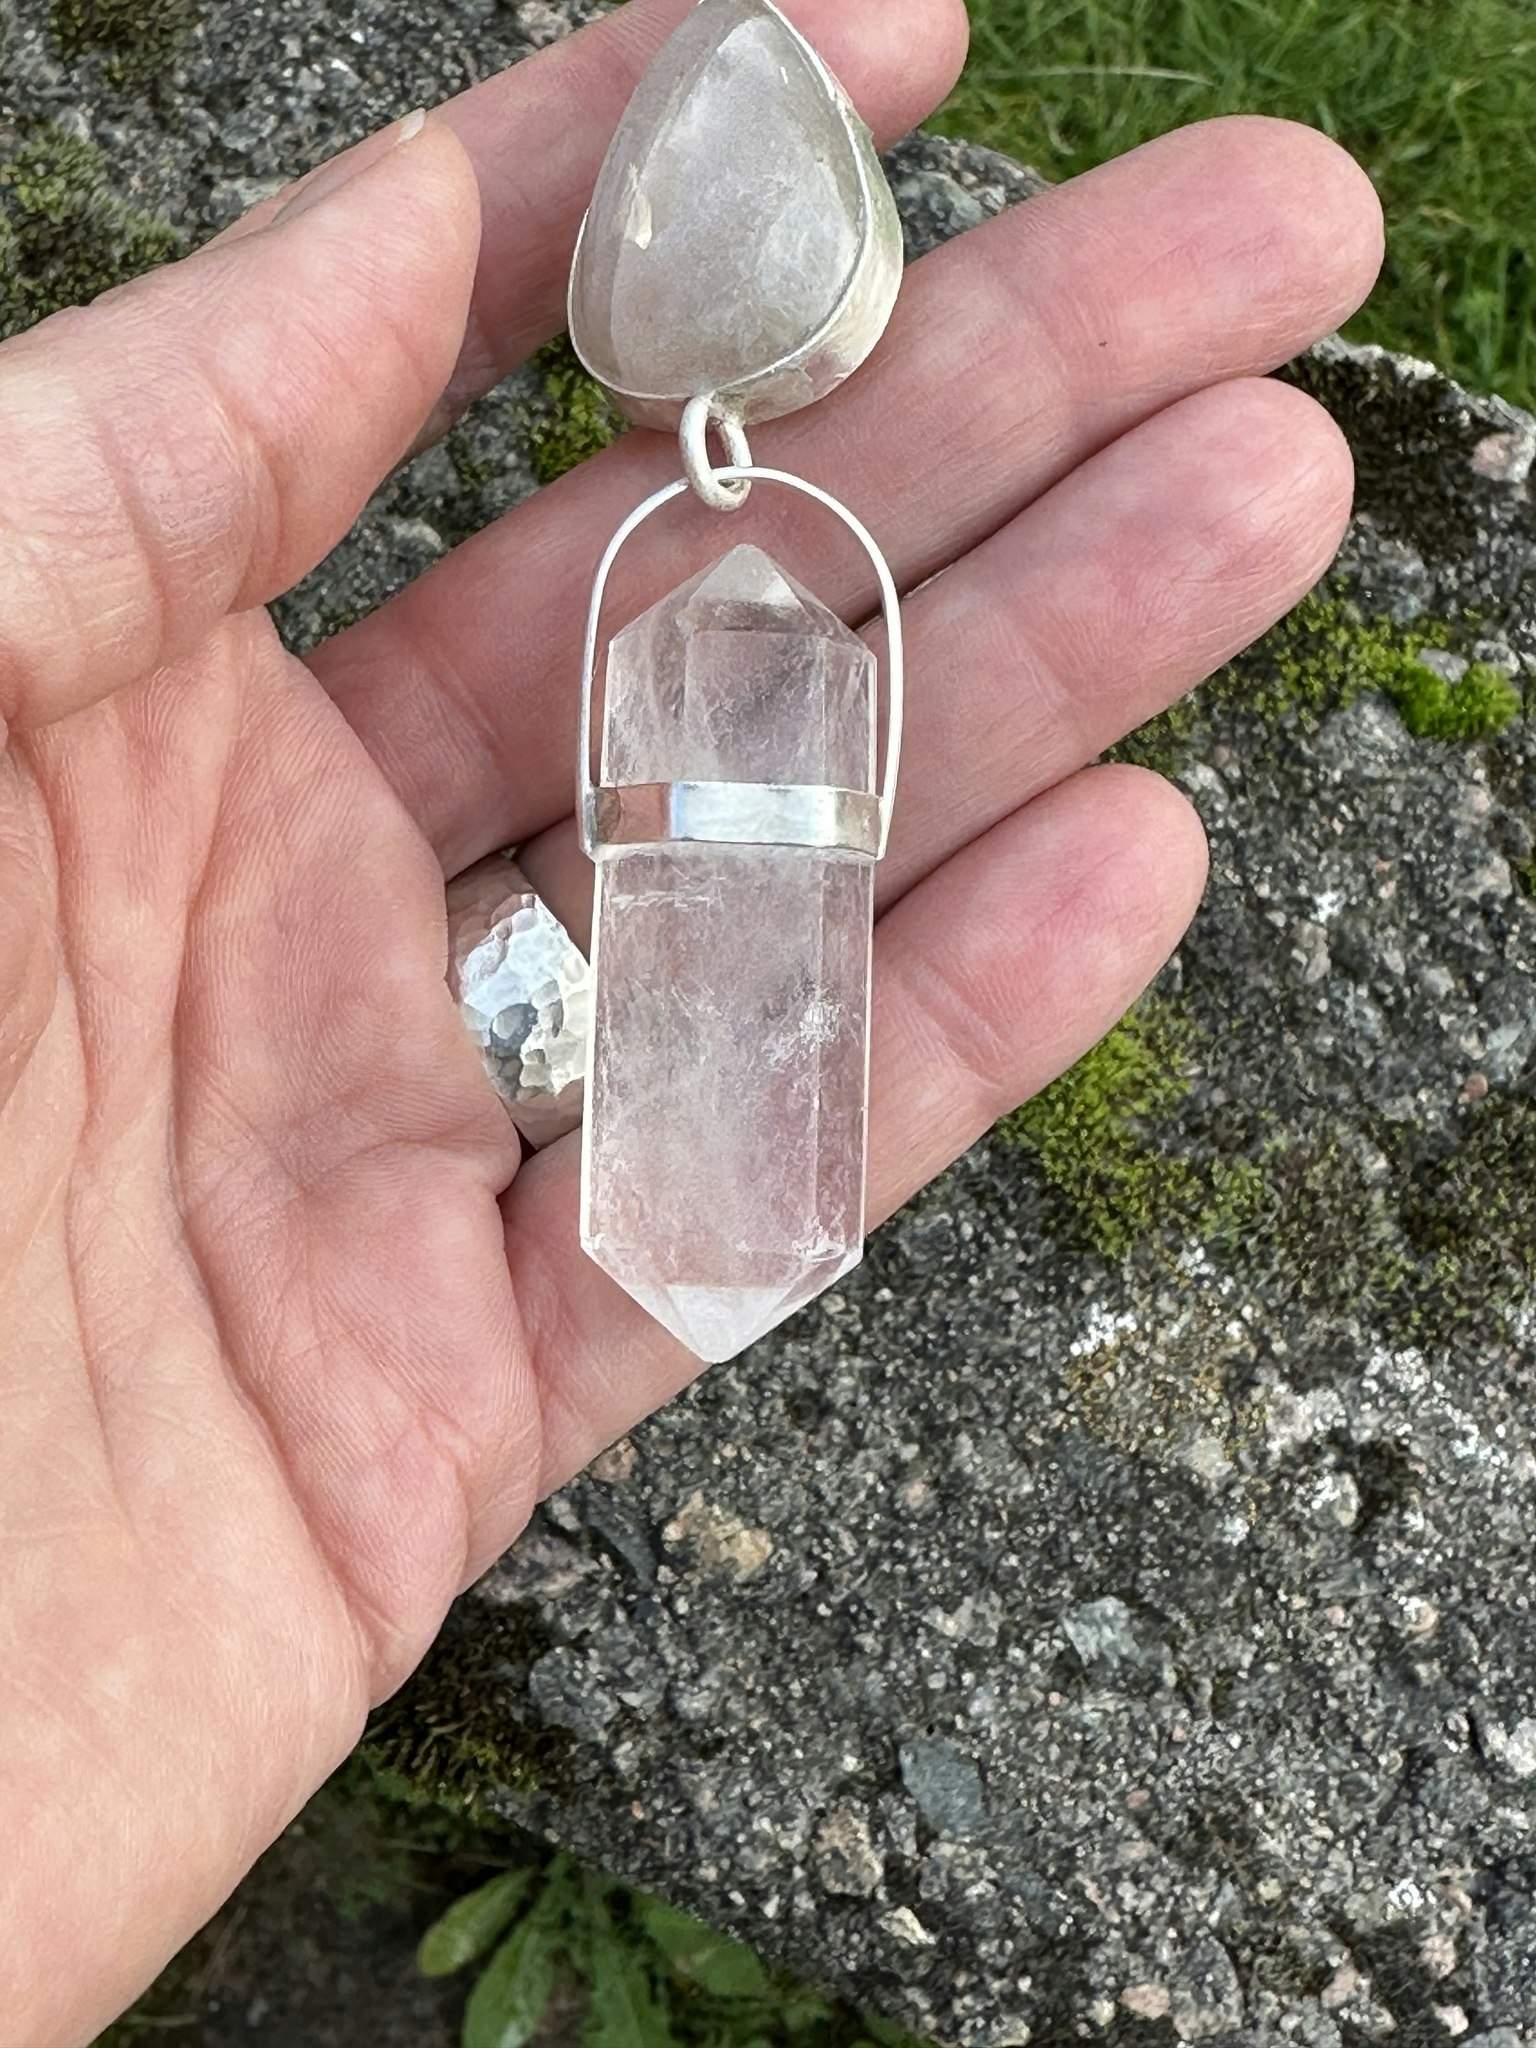 Priestess jewelry for balance, apricot rainbow moonstone with double terminated quartz crystal